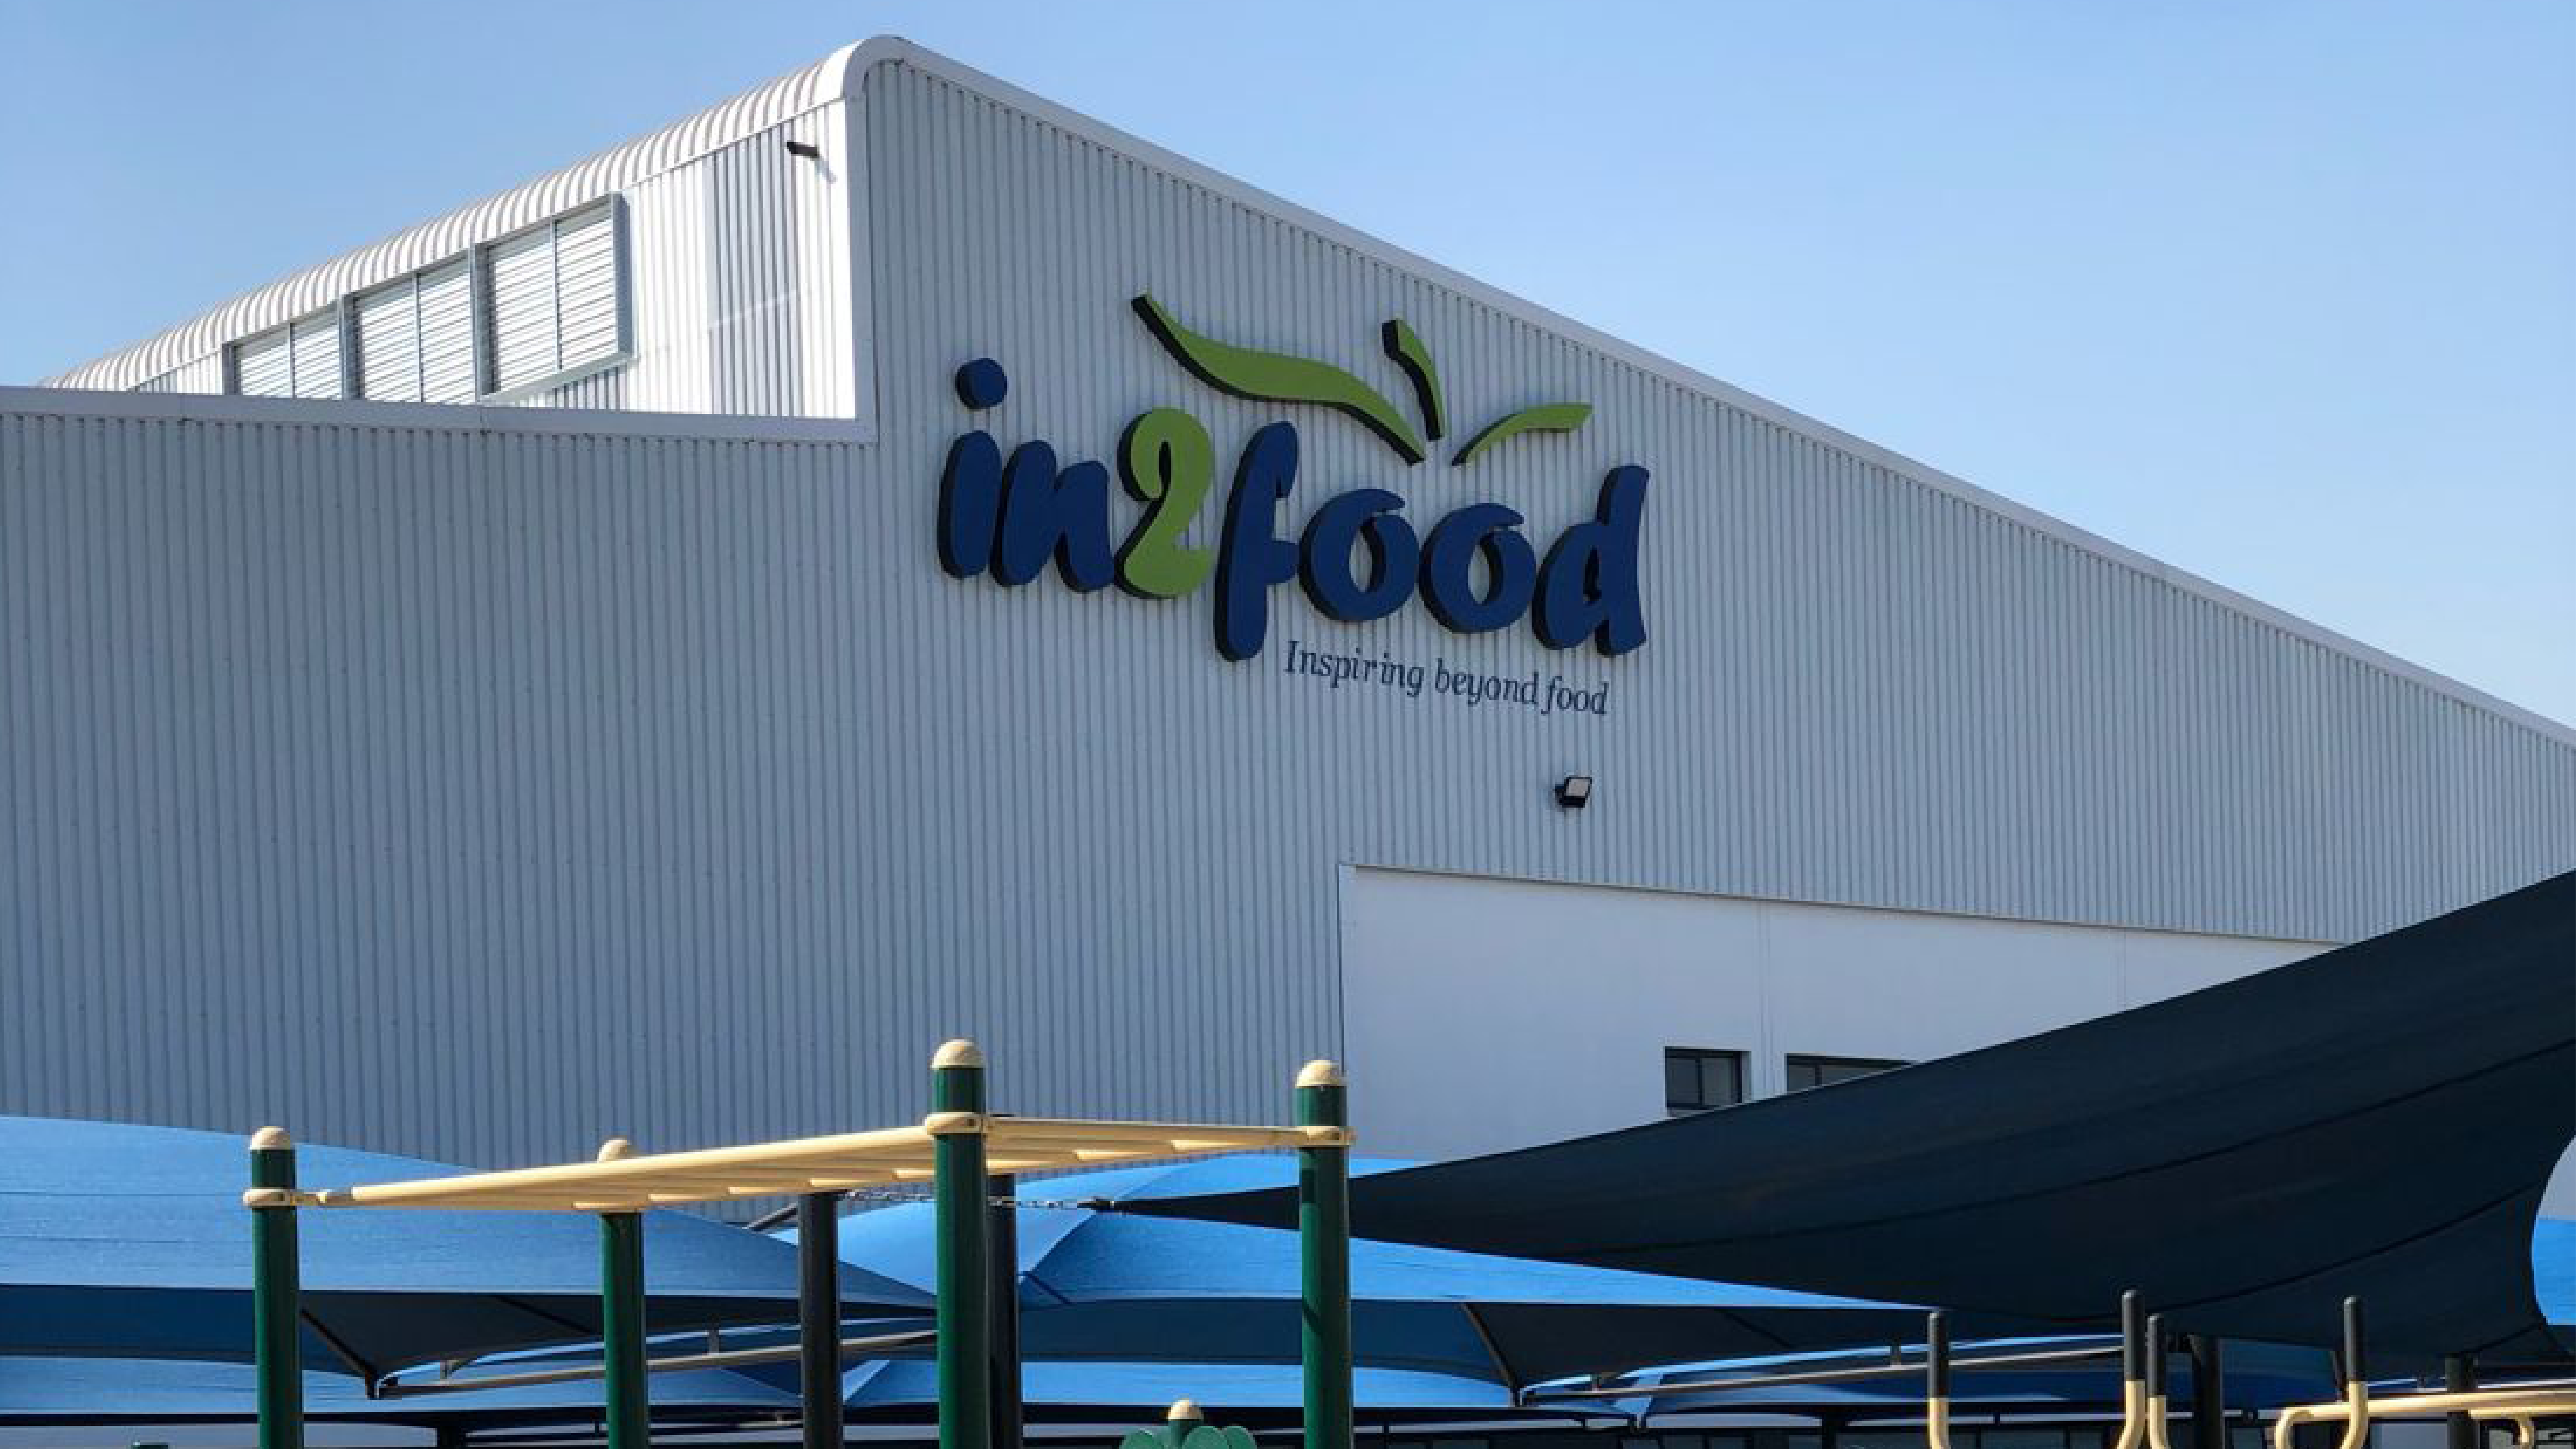 South African premium food maker In2food opens state-of-the-art manufacturing facility